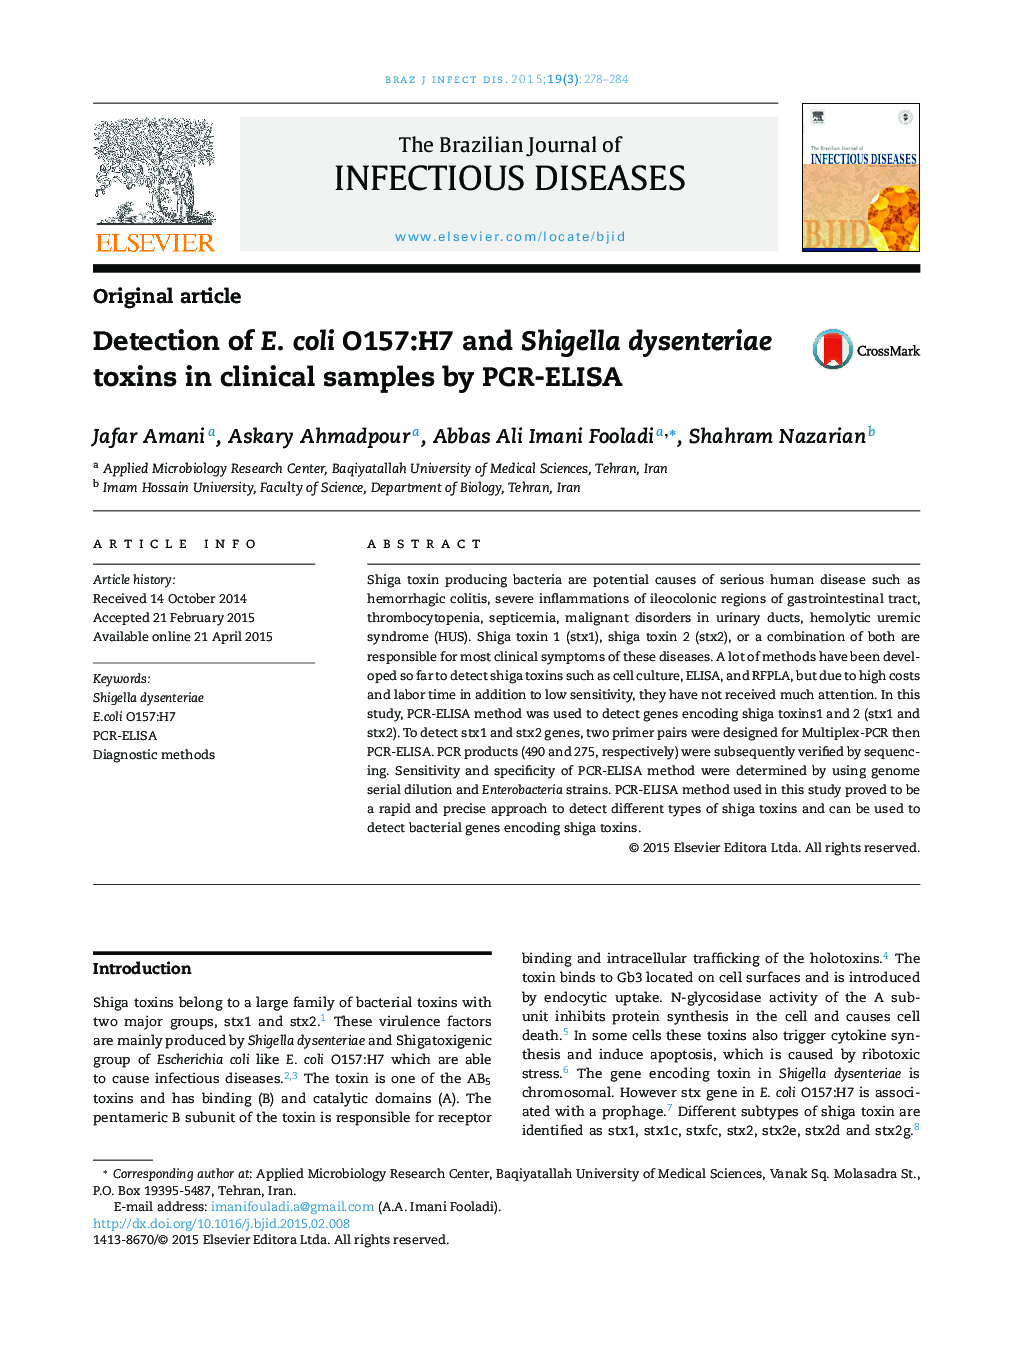 Detection of E. coli O157:H7 and Shigella dysenteriae toxins in clinical samples by PCR-ELISA